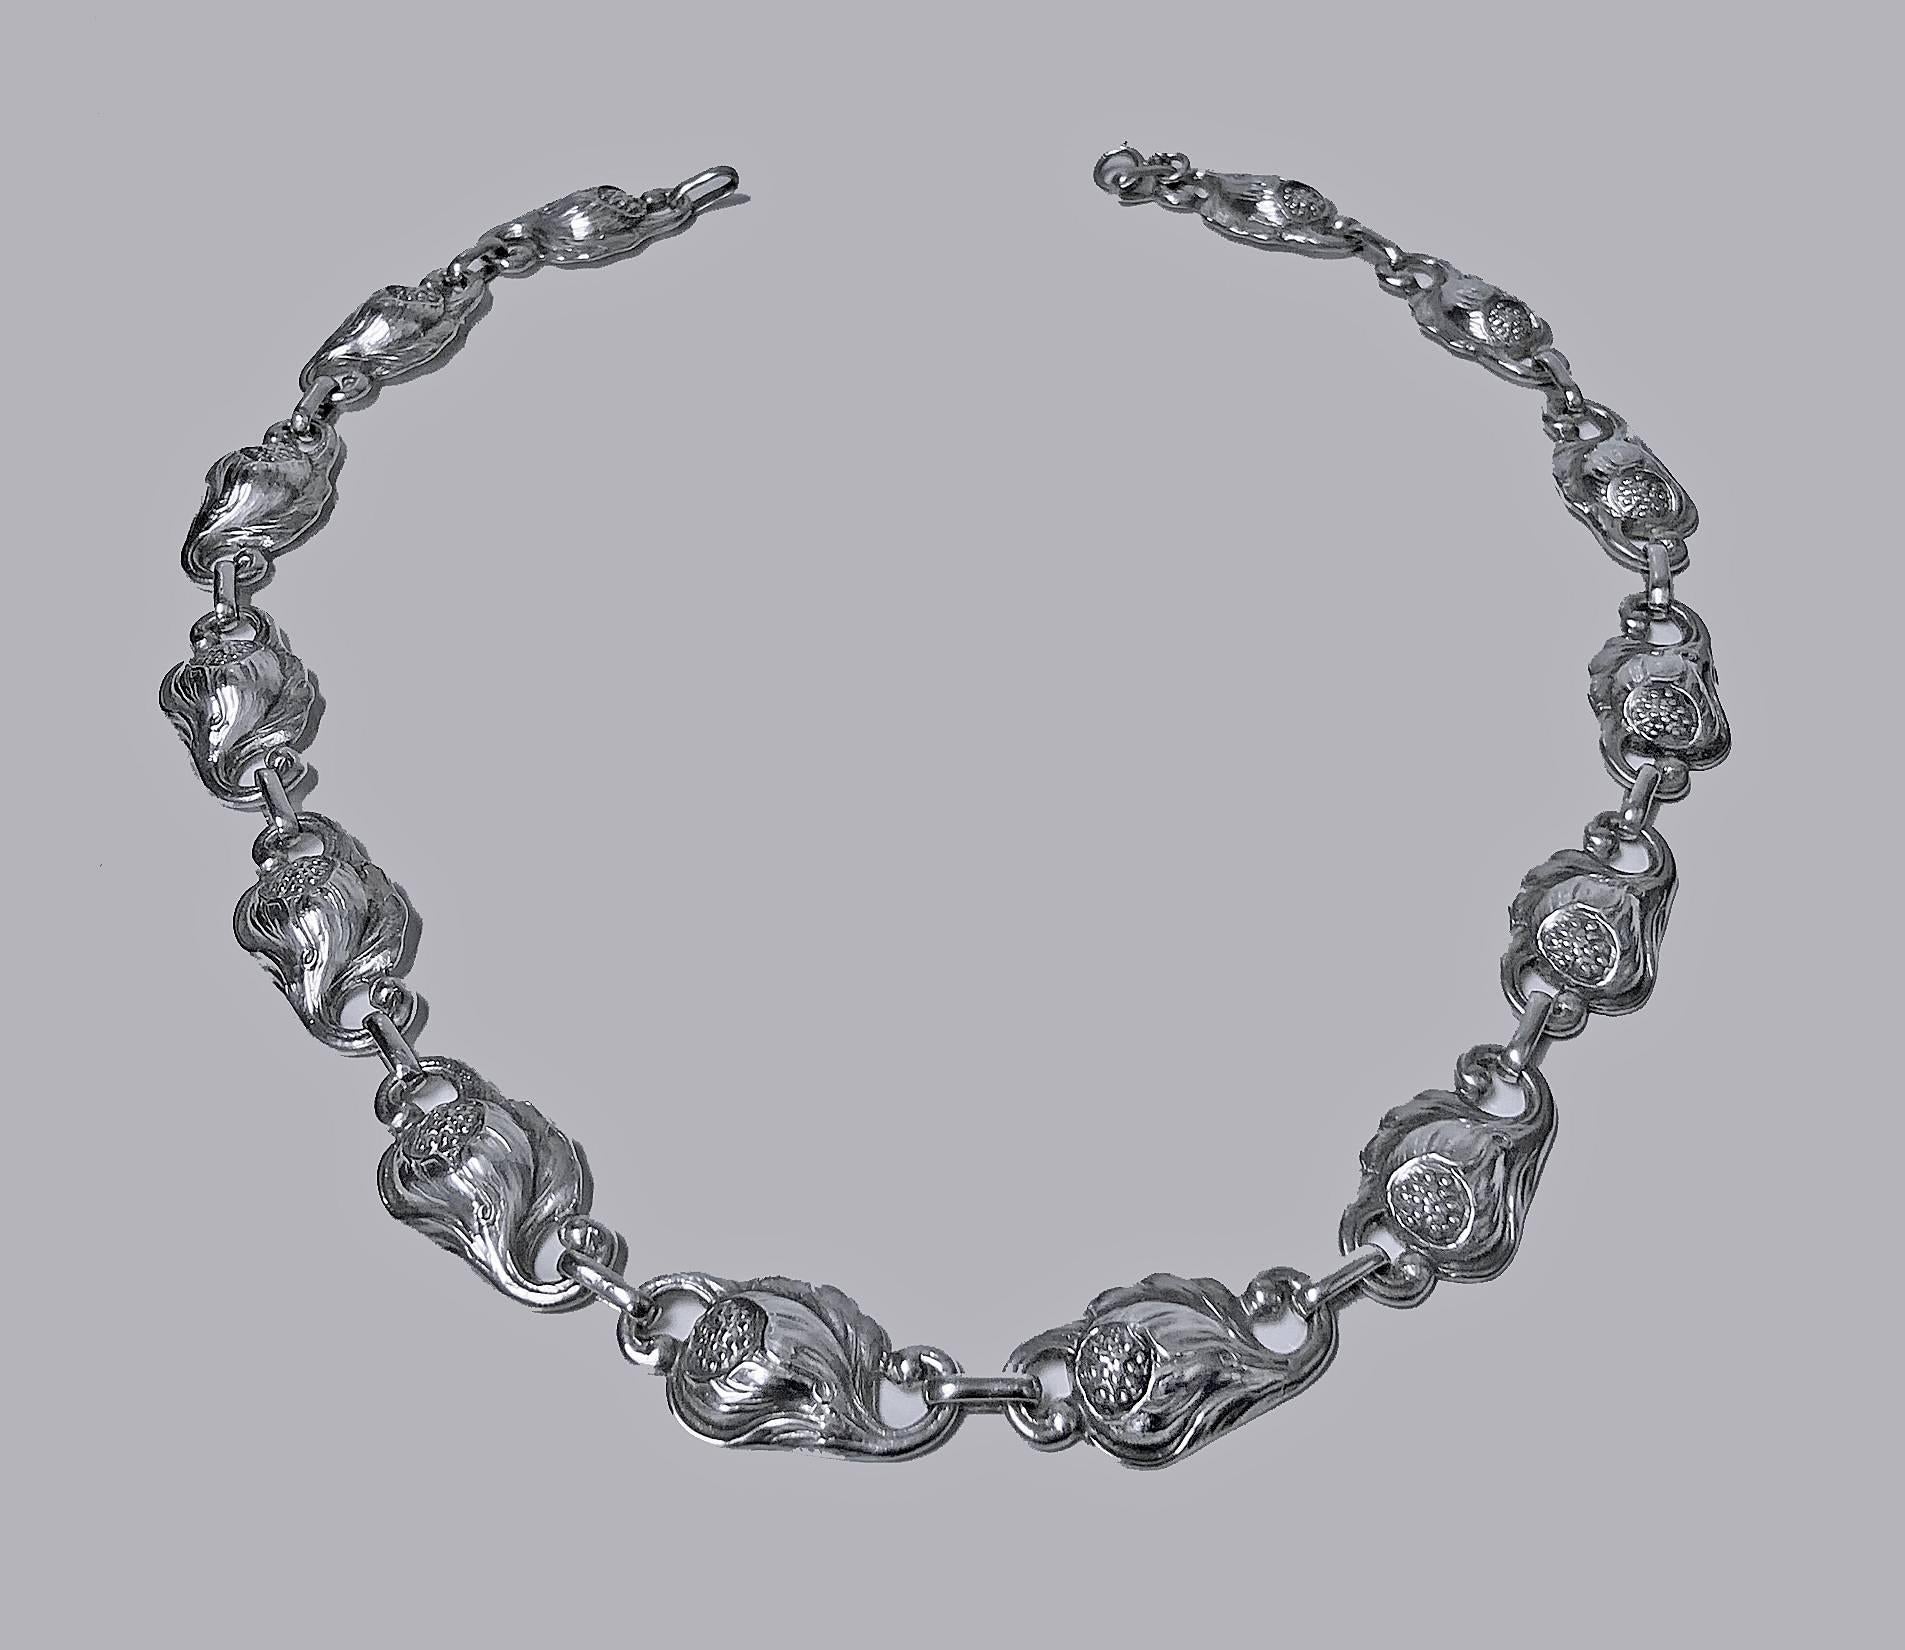 Carl Poul Petersen hand made Sterling Silver Necklace, Montreal C.1940. The Necklace with fourteen organic foliate open bud motif links, later spring ring fastener. Reverse with marks hand made Sterling PP for Petersen and Canadian silver mark.